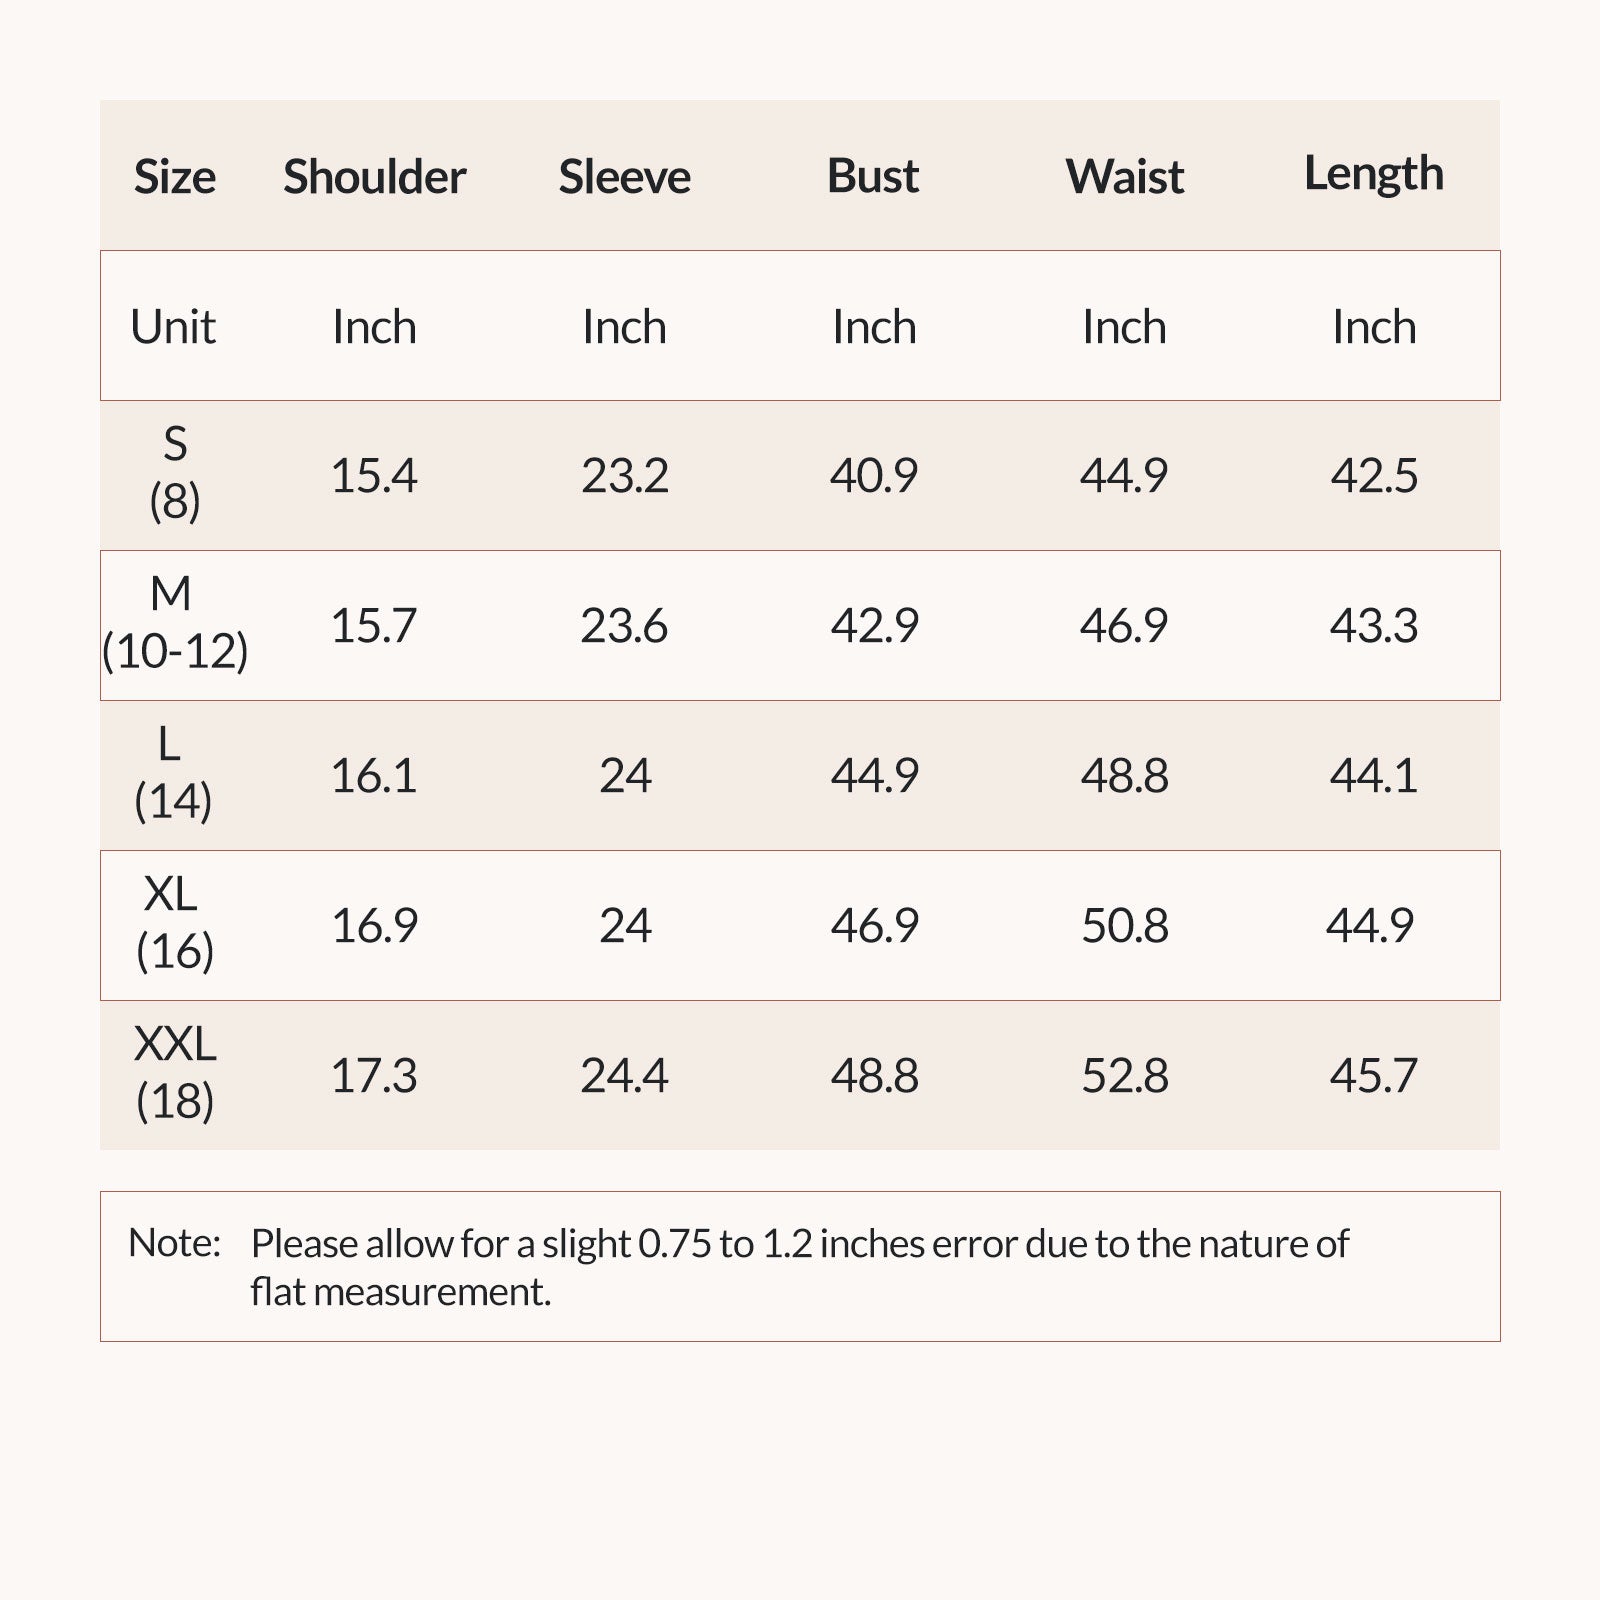 womens middle eastern long shirt size chart